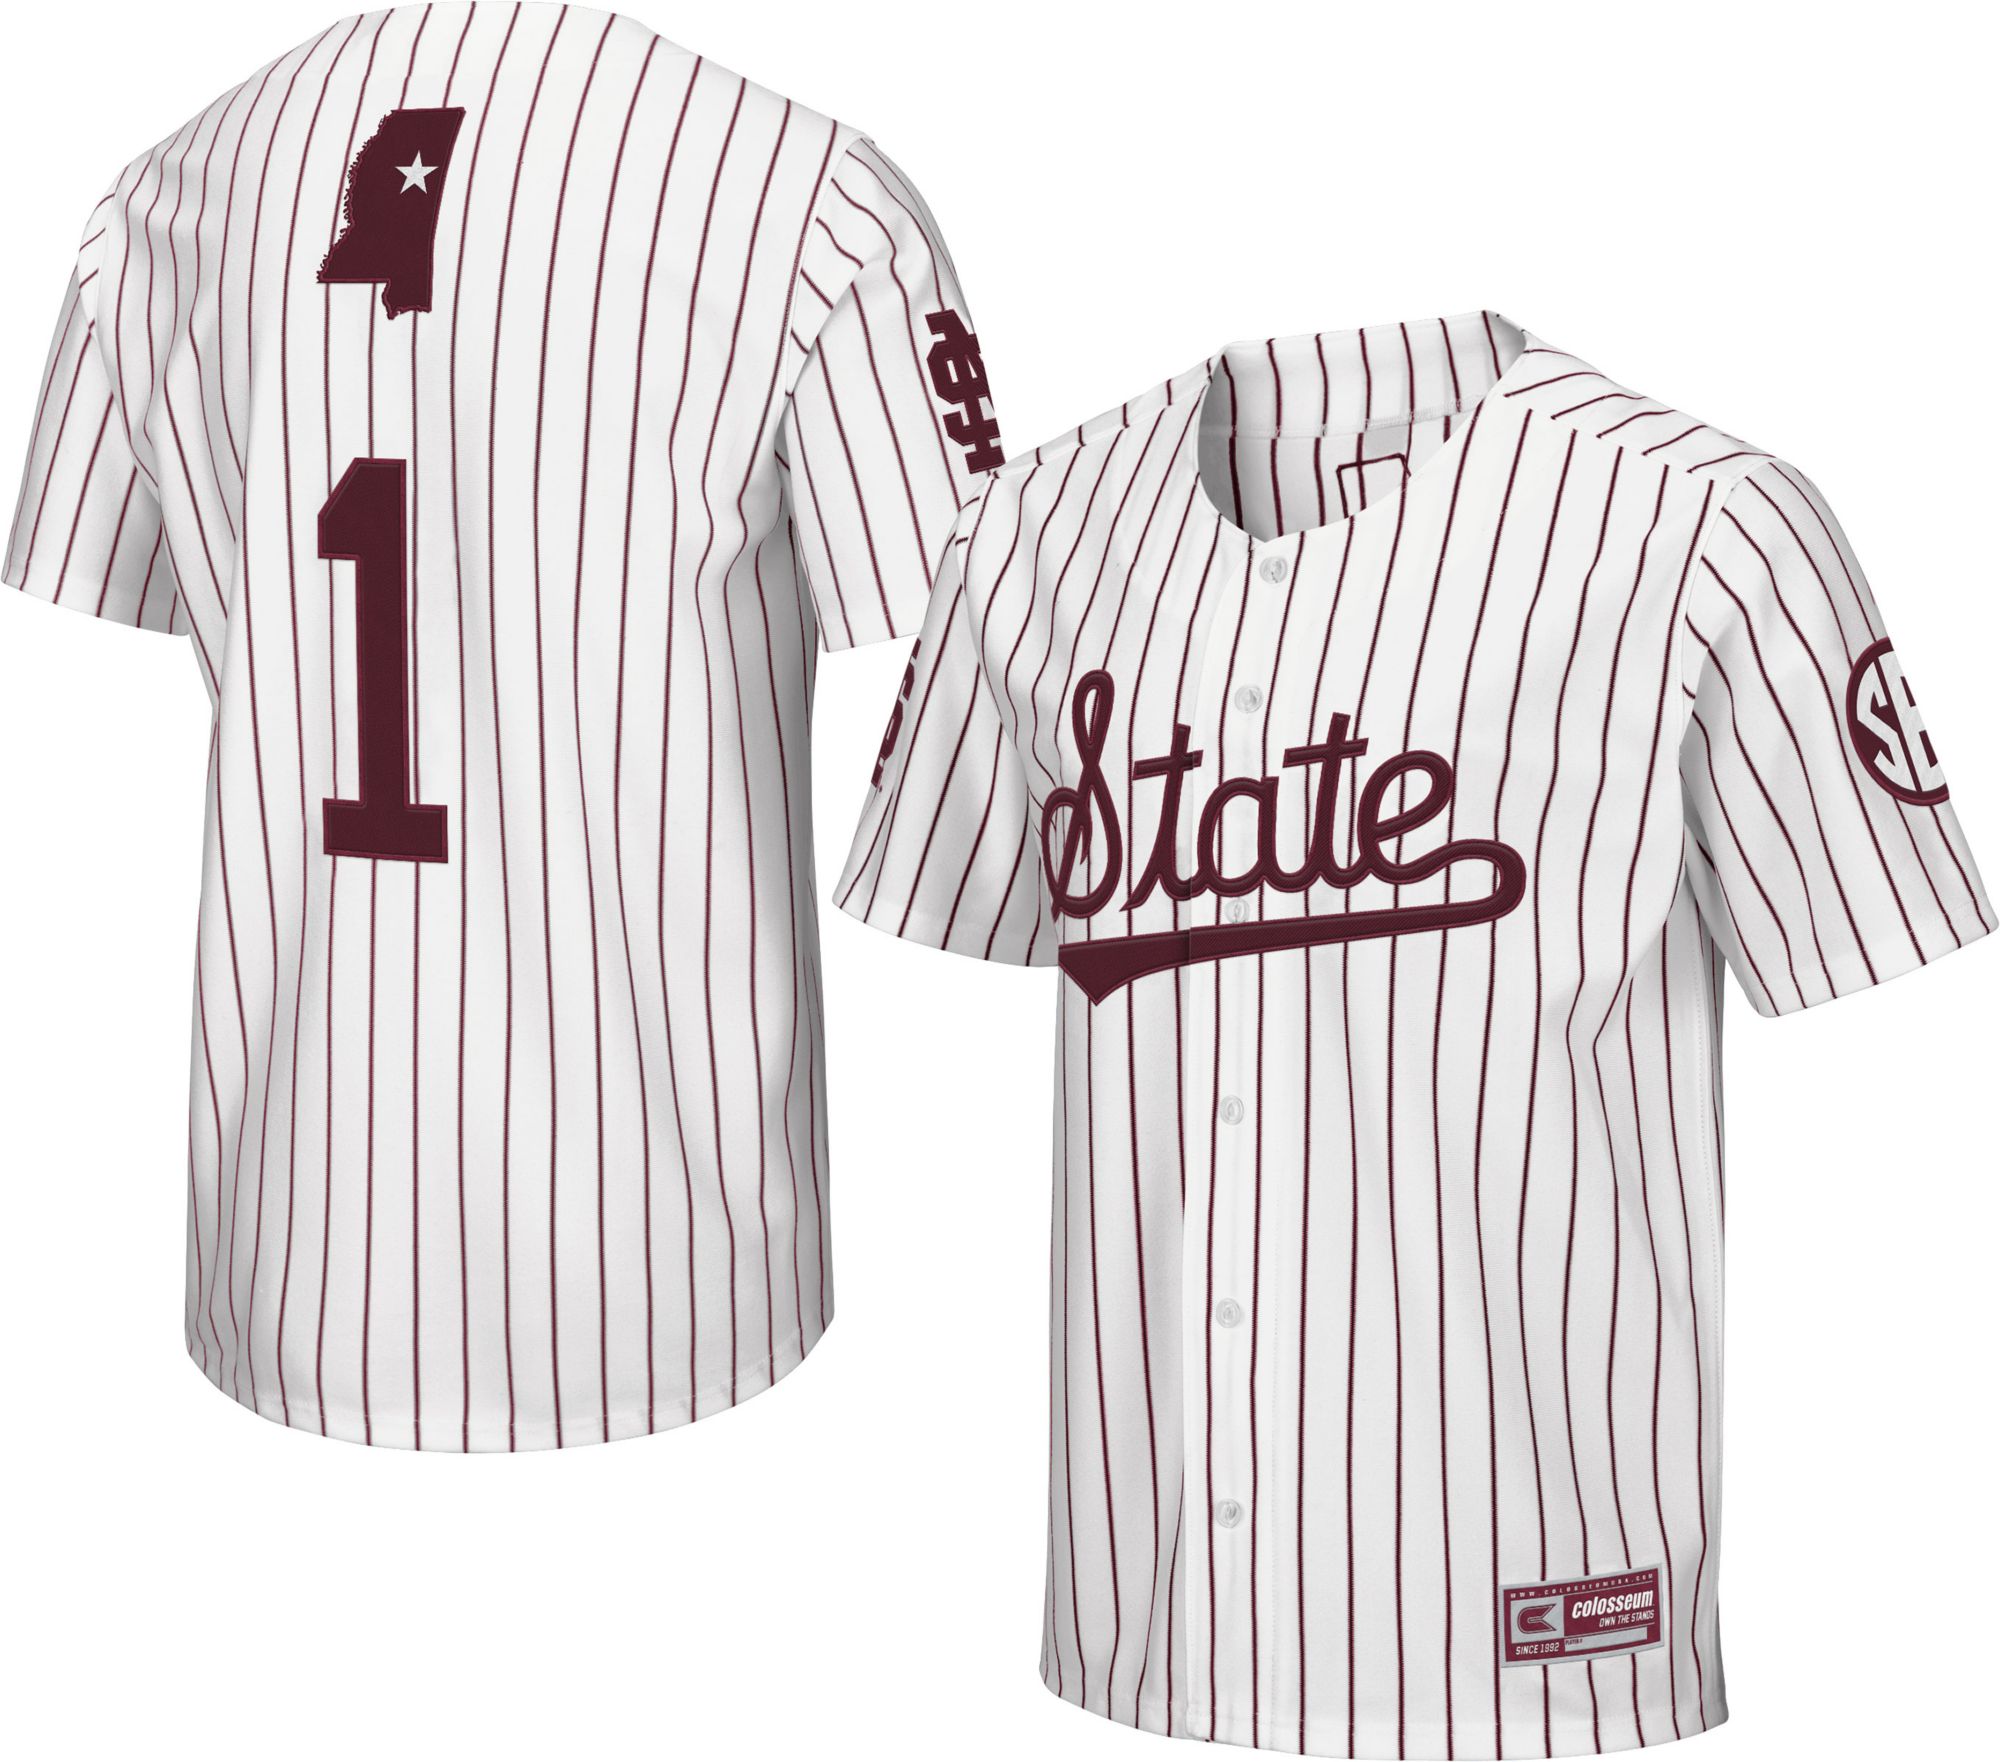 ms state jersey